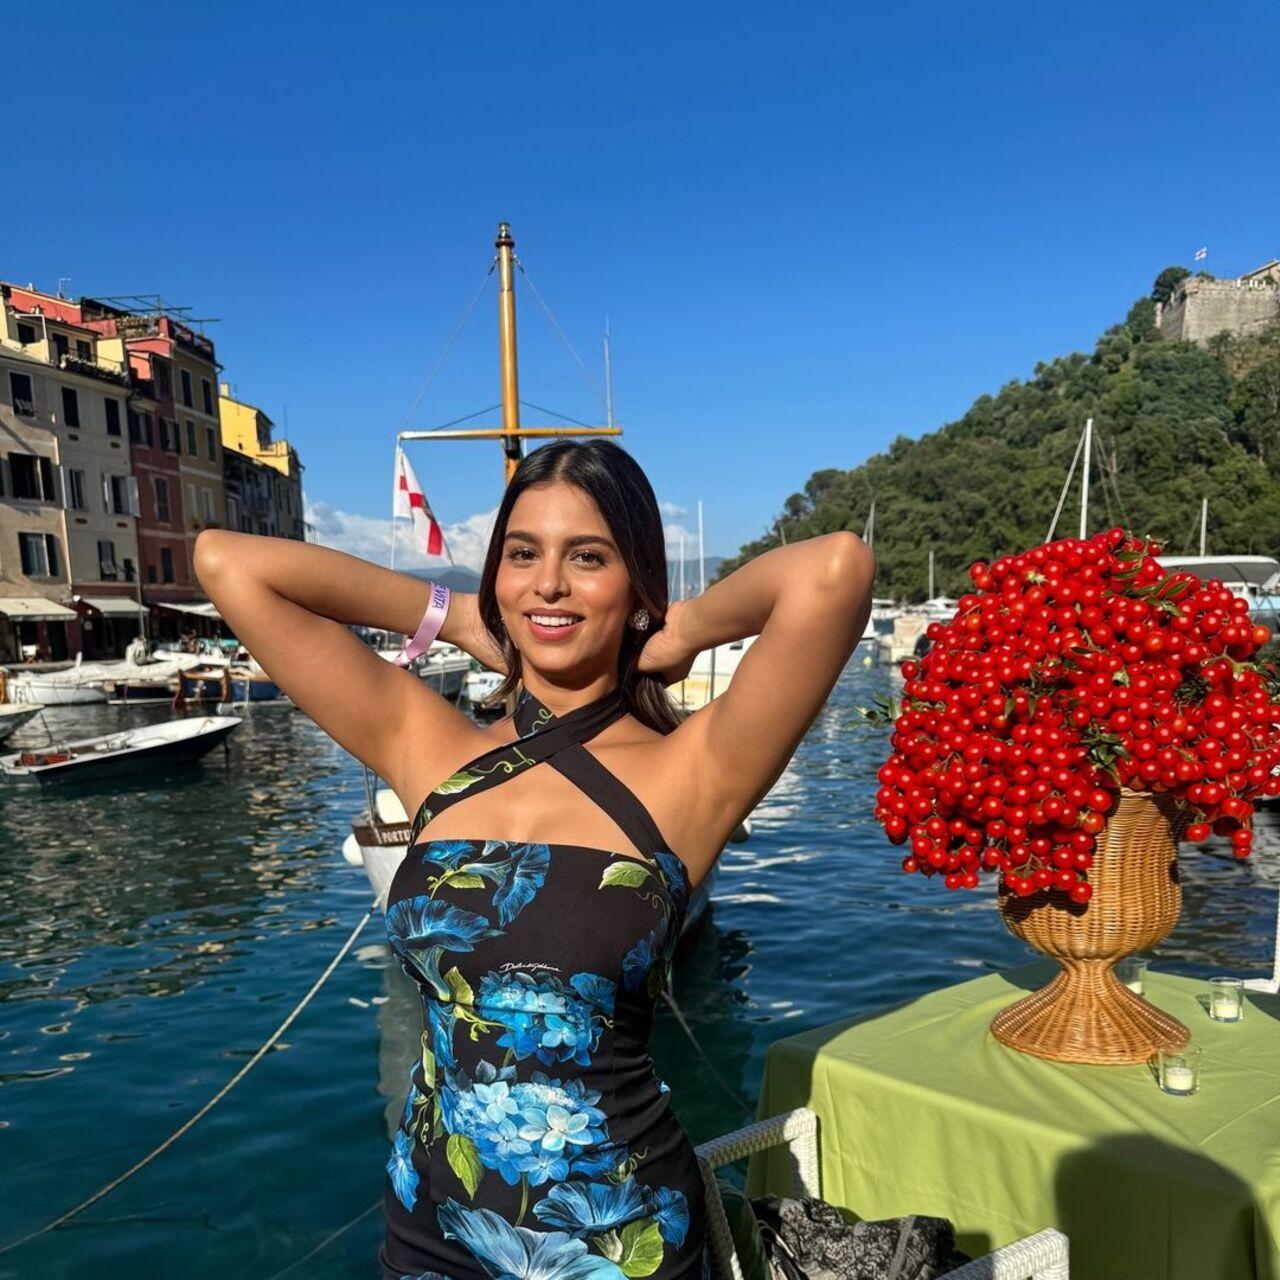 Suhana Khan also shared some pictures on her Instagram handle where she can be happily soaking in the Italian sun